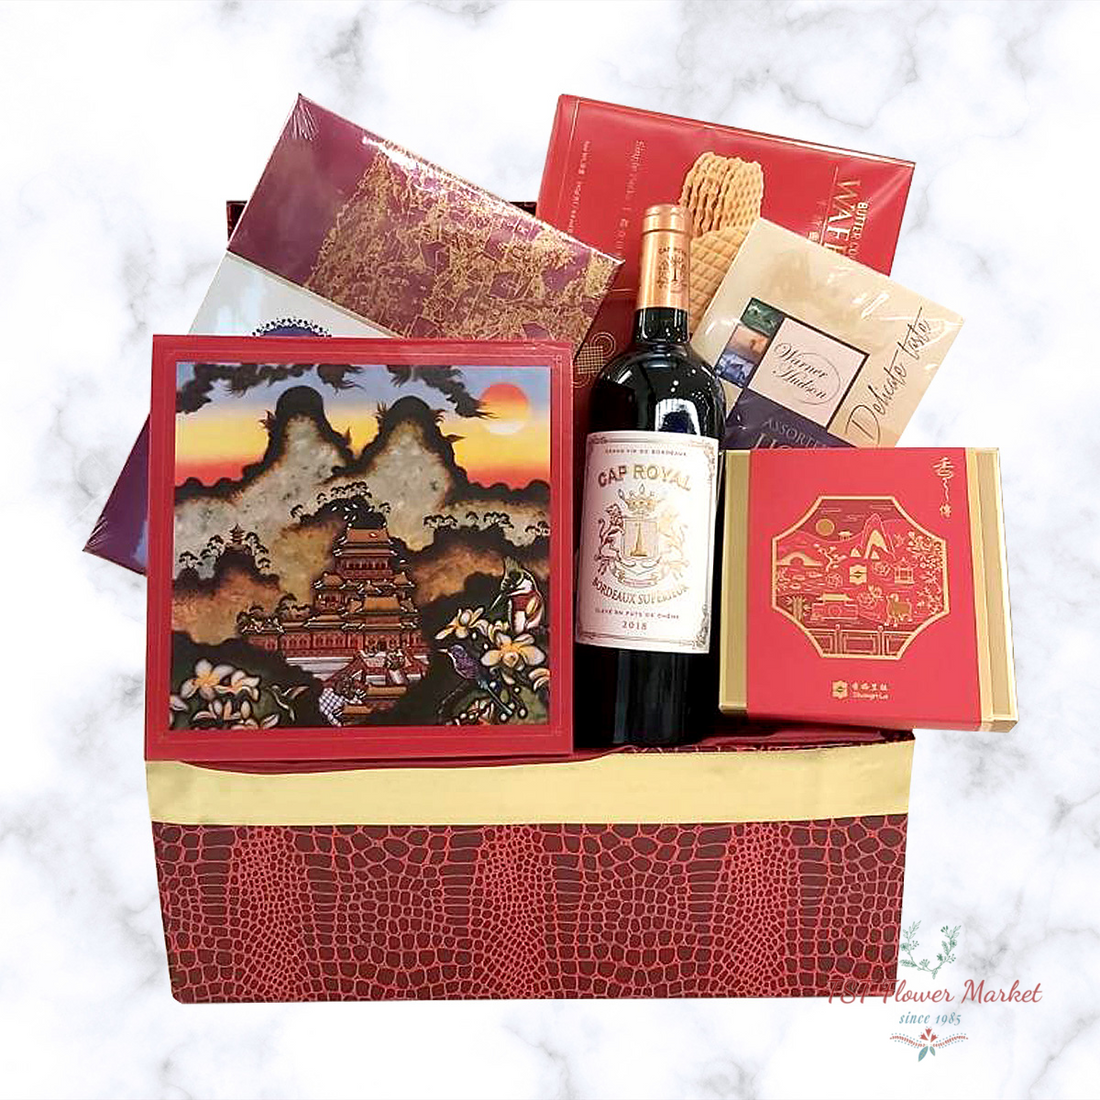 Mid Autumn Hamper 中秋節果籃A11-This hamper is packed with deluxe refreshments, including chocolate snacks, a bottle of wine, mooncakes from ShangriLa.-TST Flower Market